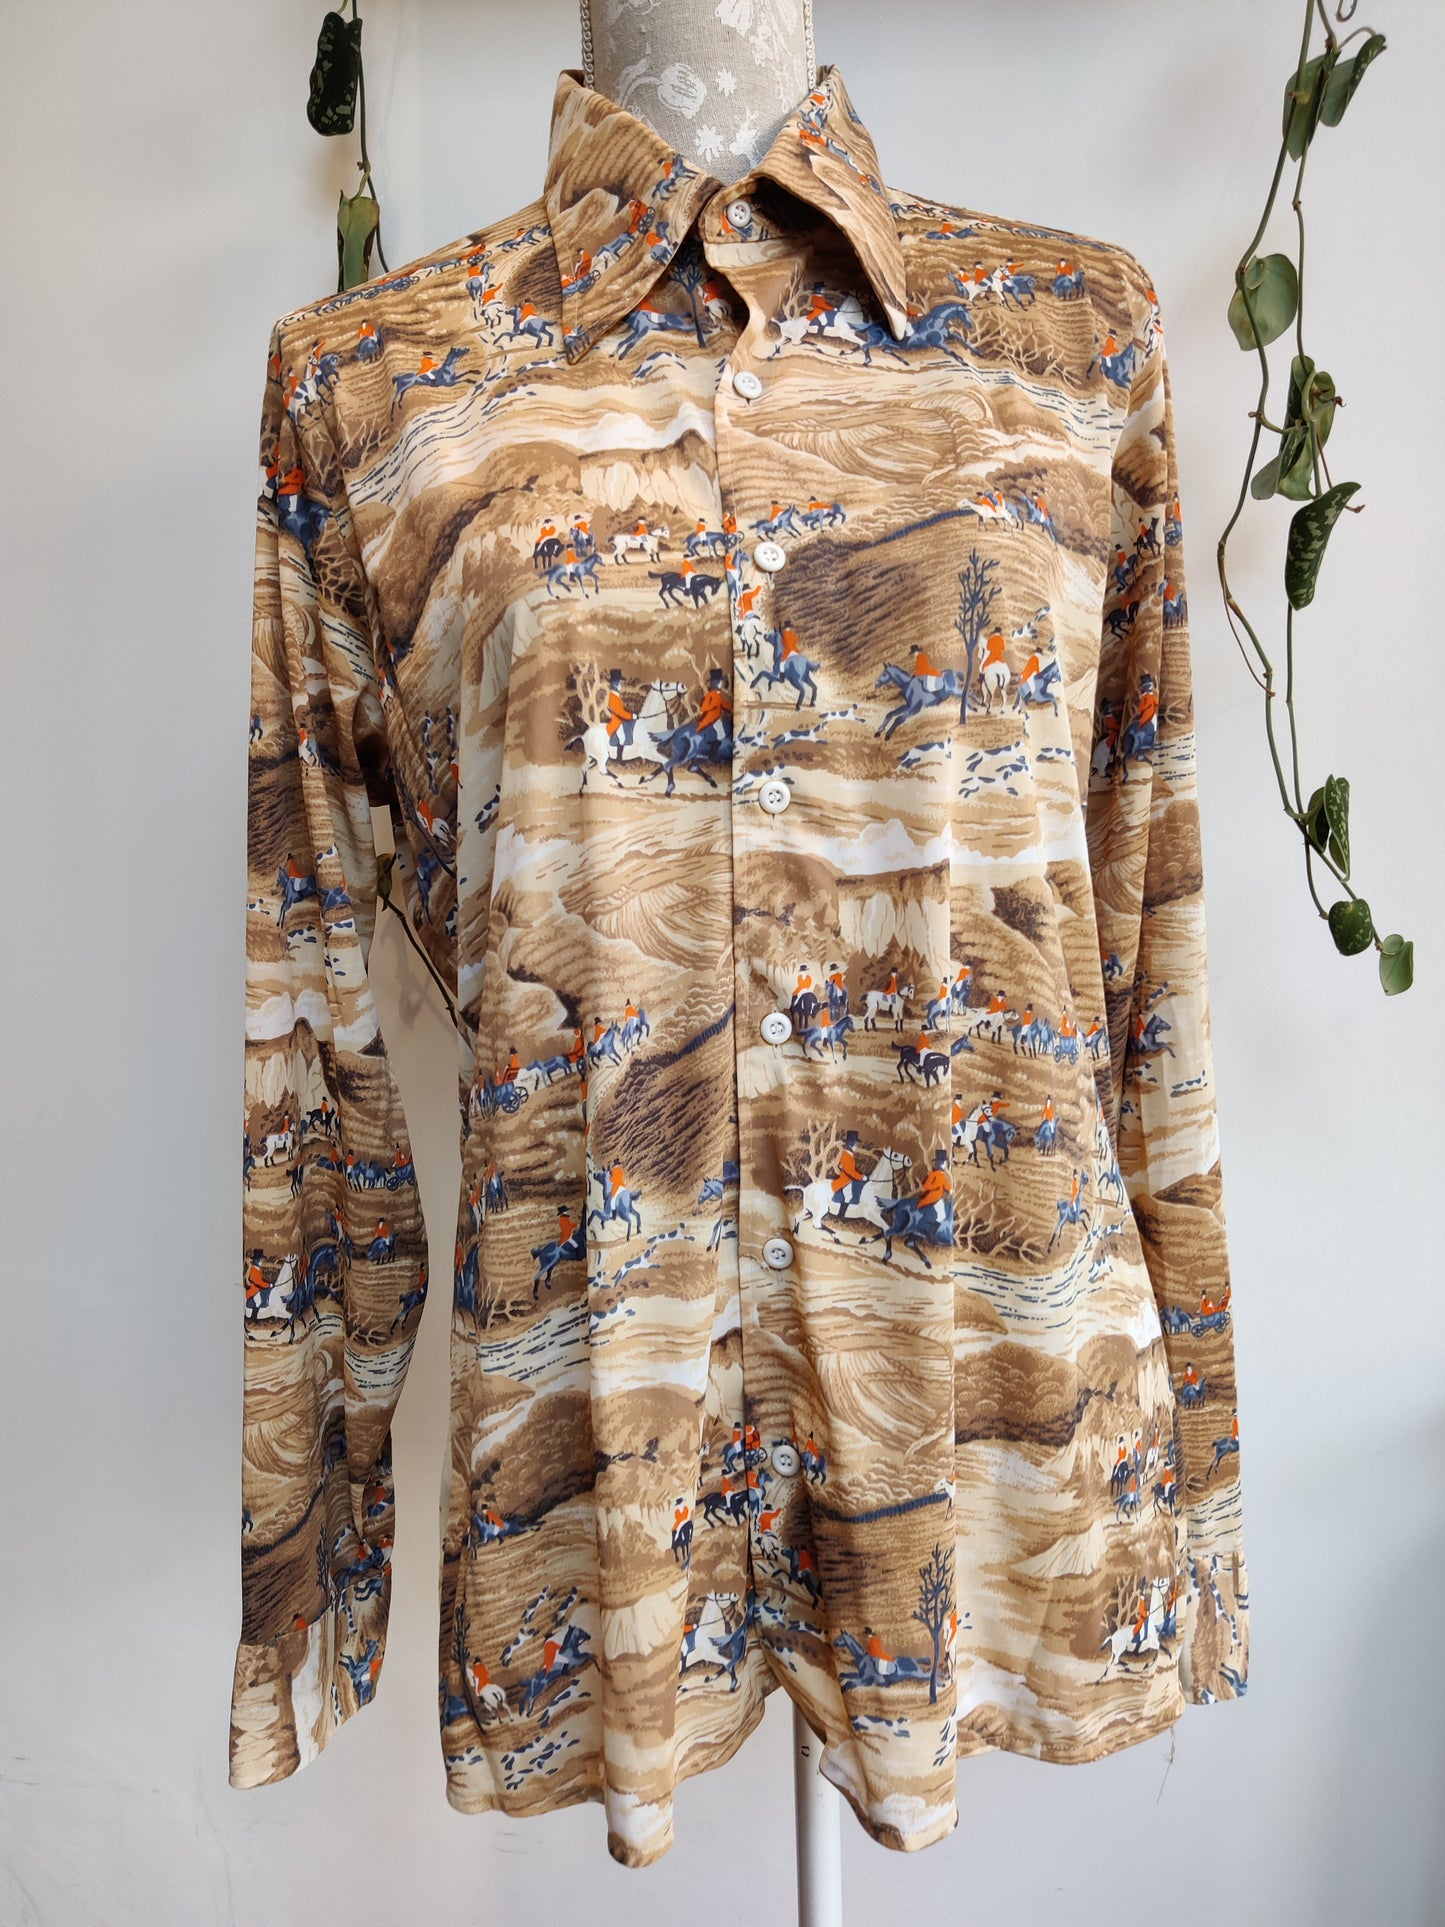 70s shirt with novelty print